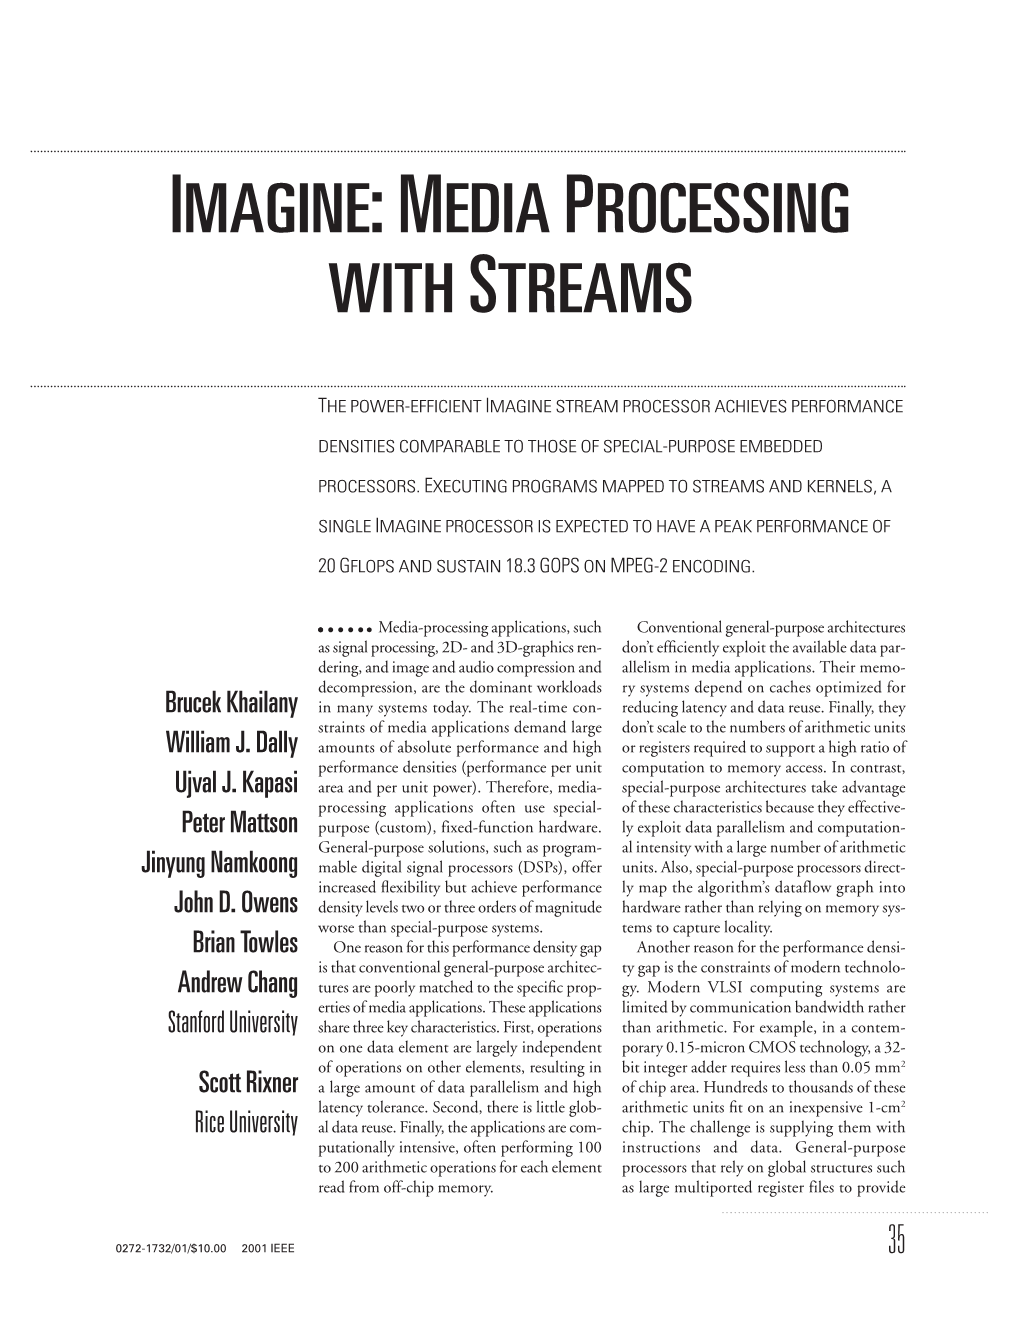 Imagine: Media Processing with Streams